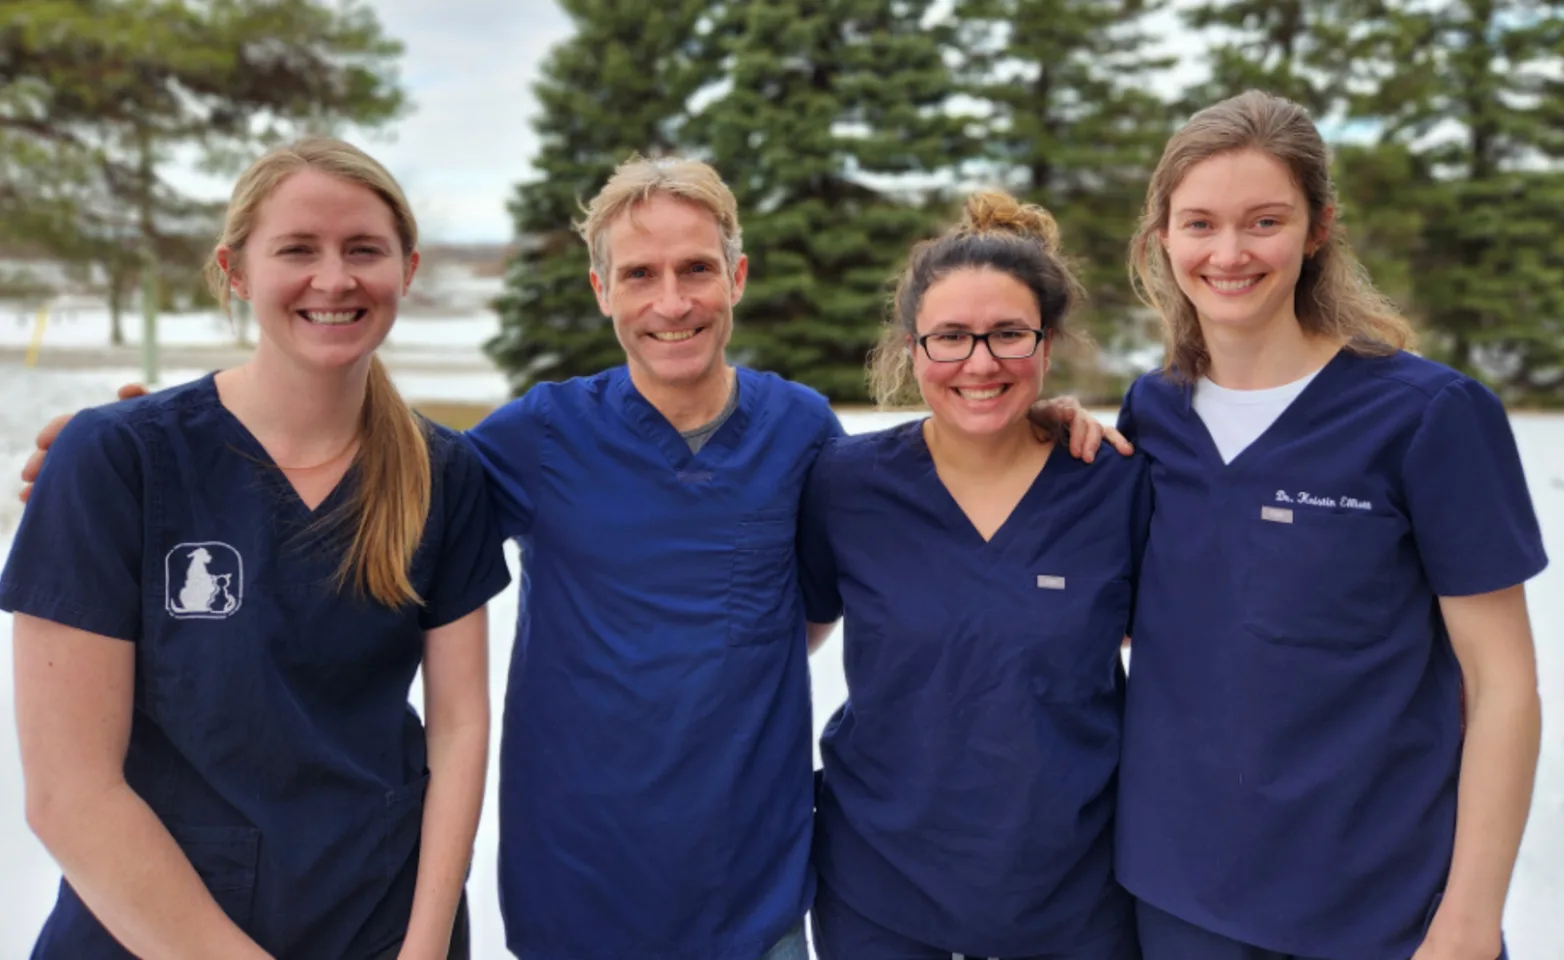 The Doctor Team at Mount Brydges Animal Clinic